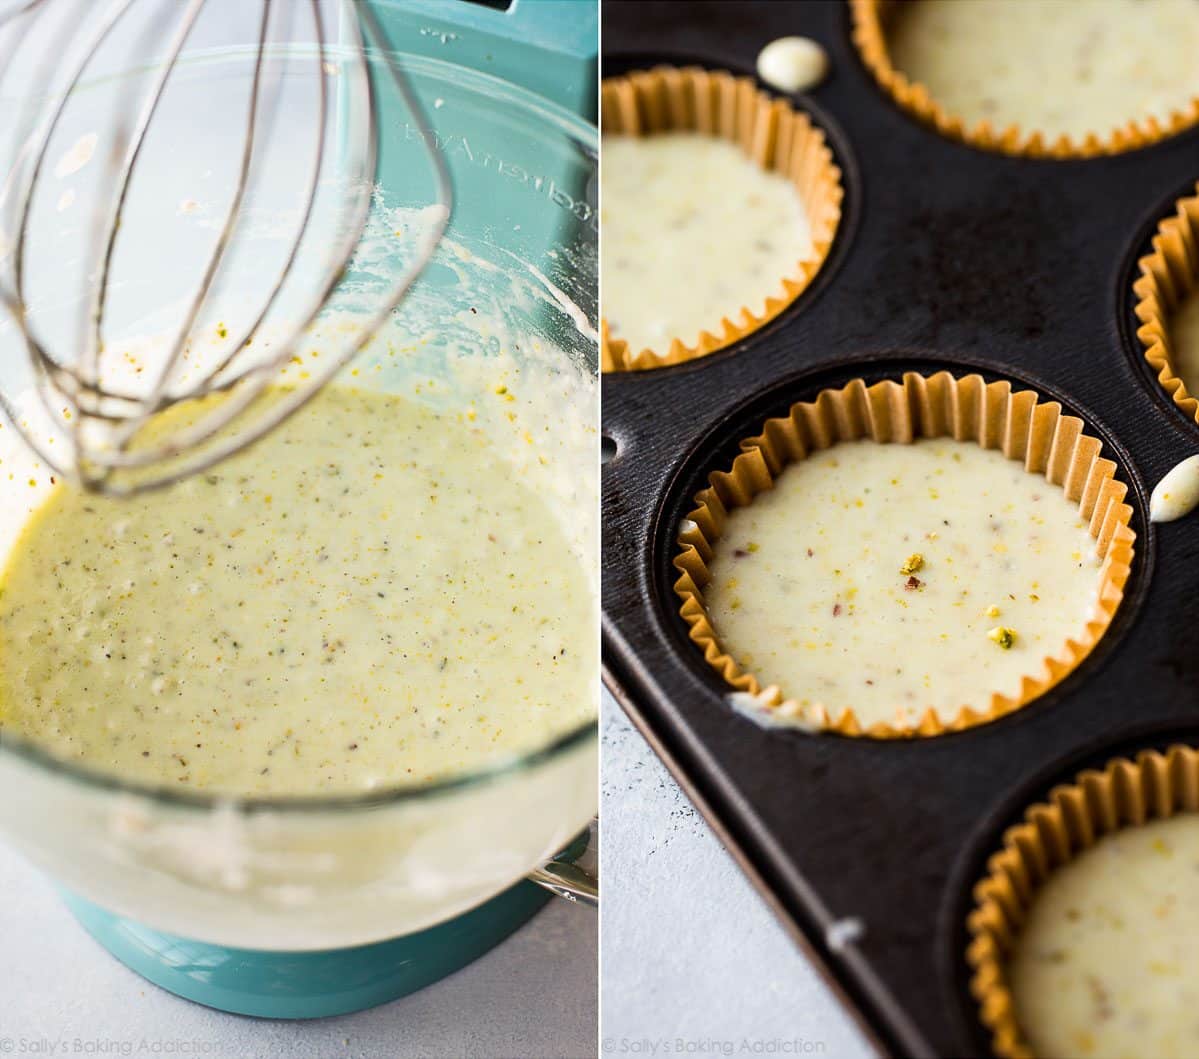 2 images of pistachio cupcake batter in a glass bowl and cupcake batter in a cupcake pan